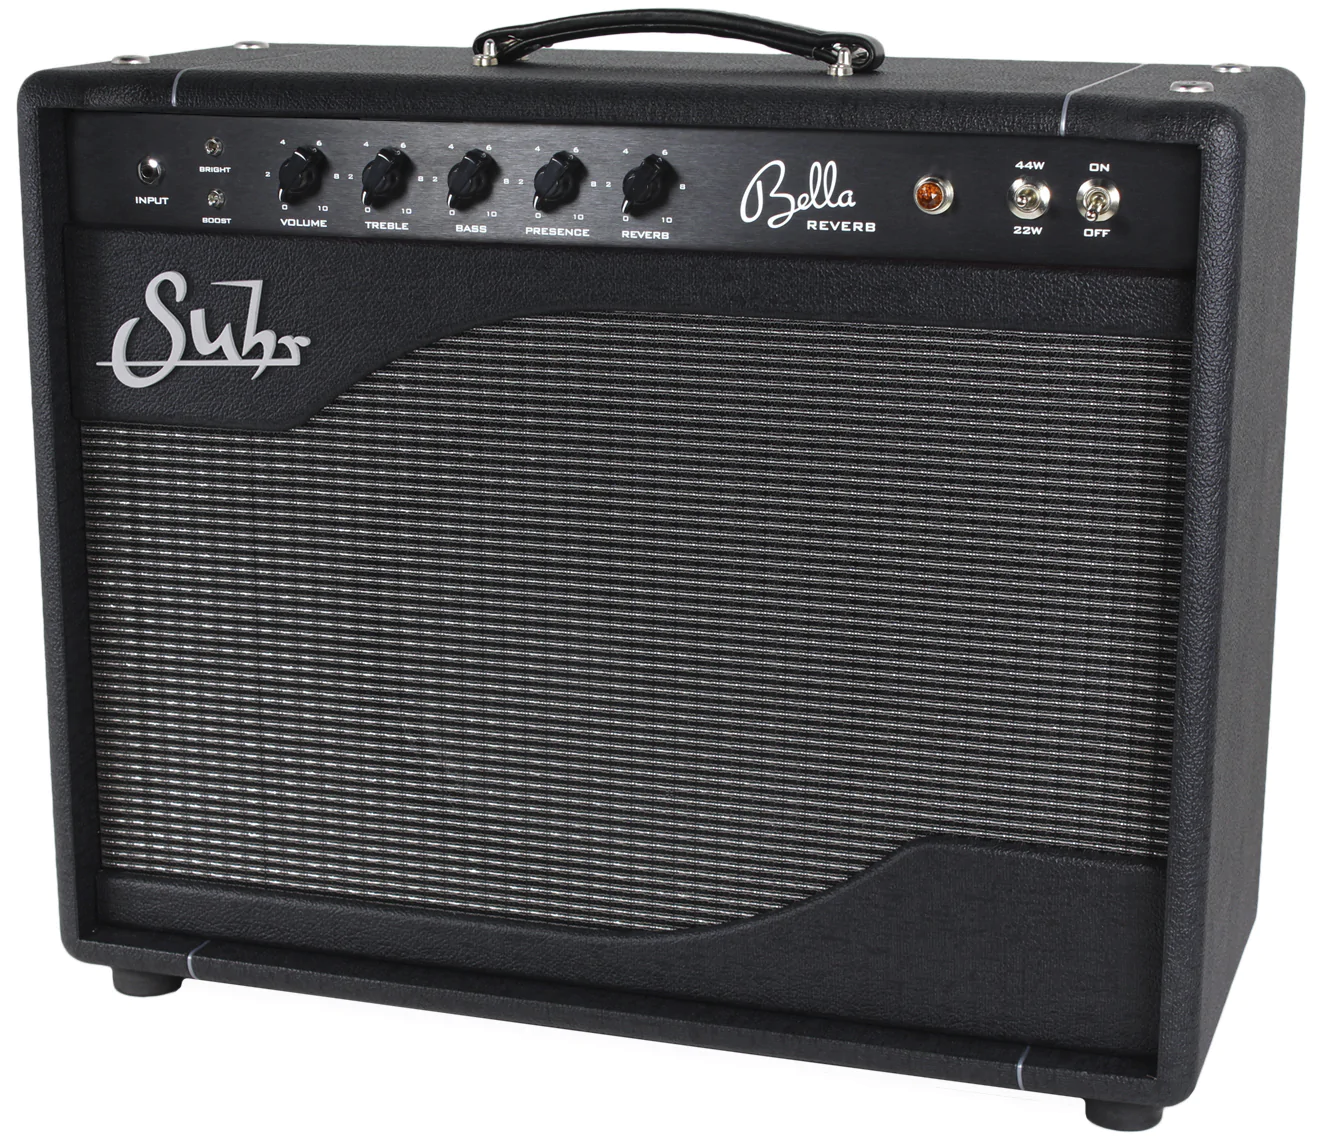 Suhr Bella Reverb 1x12 Combo Guitar Amp LOCAL PICKUP ONLY - Danville Music